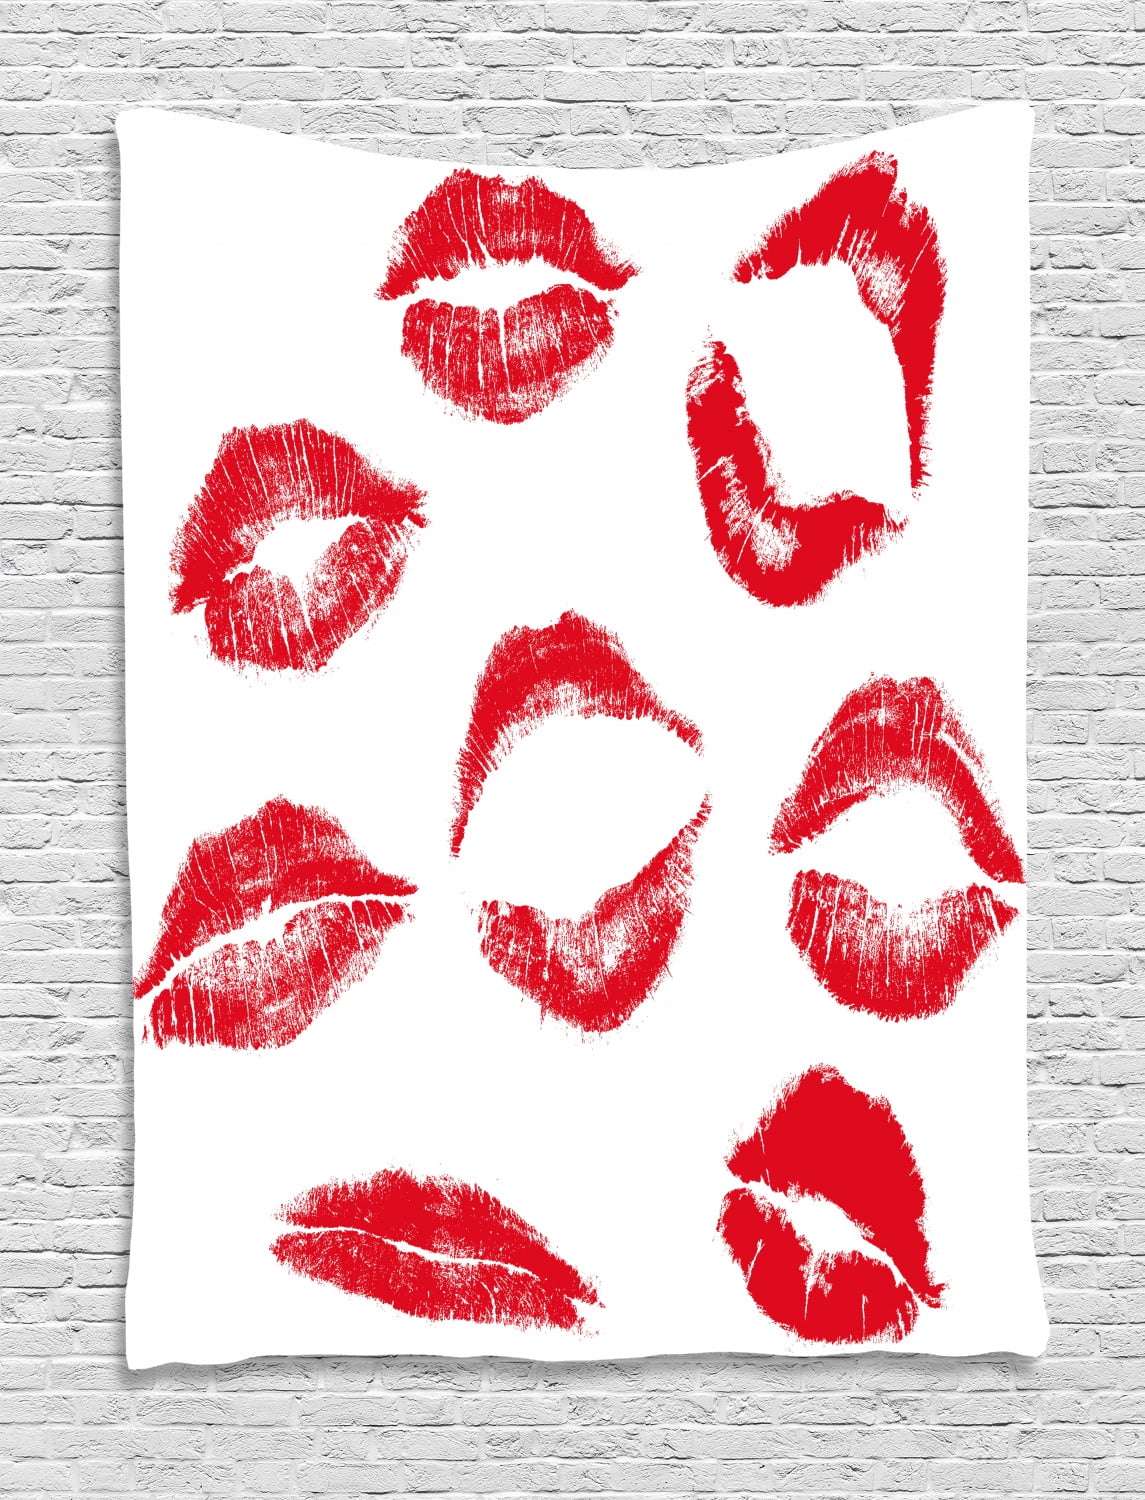 Kiss Tapestry, Various Different Kiss Marks in Red Woman Seduction ...